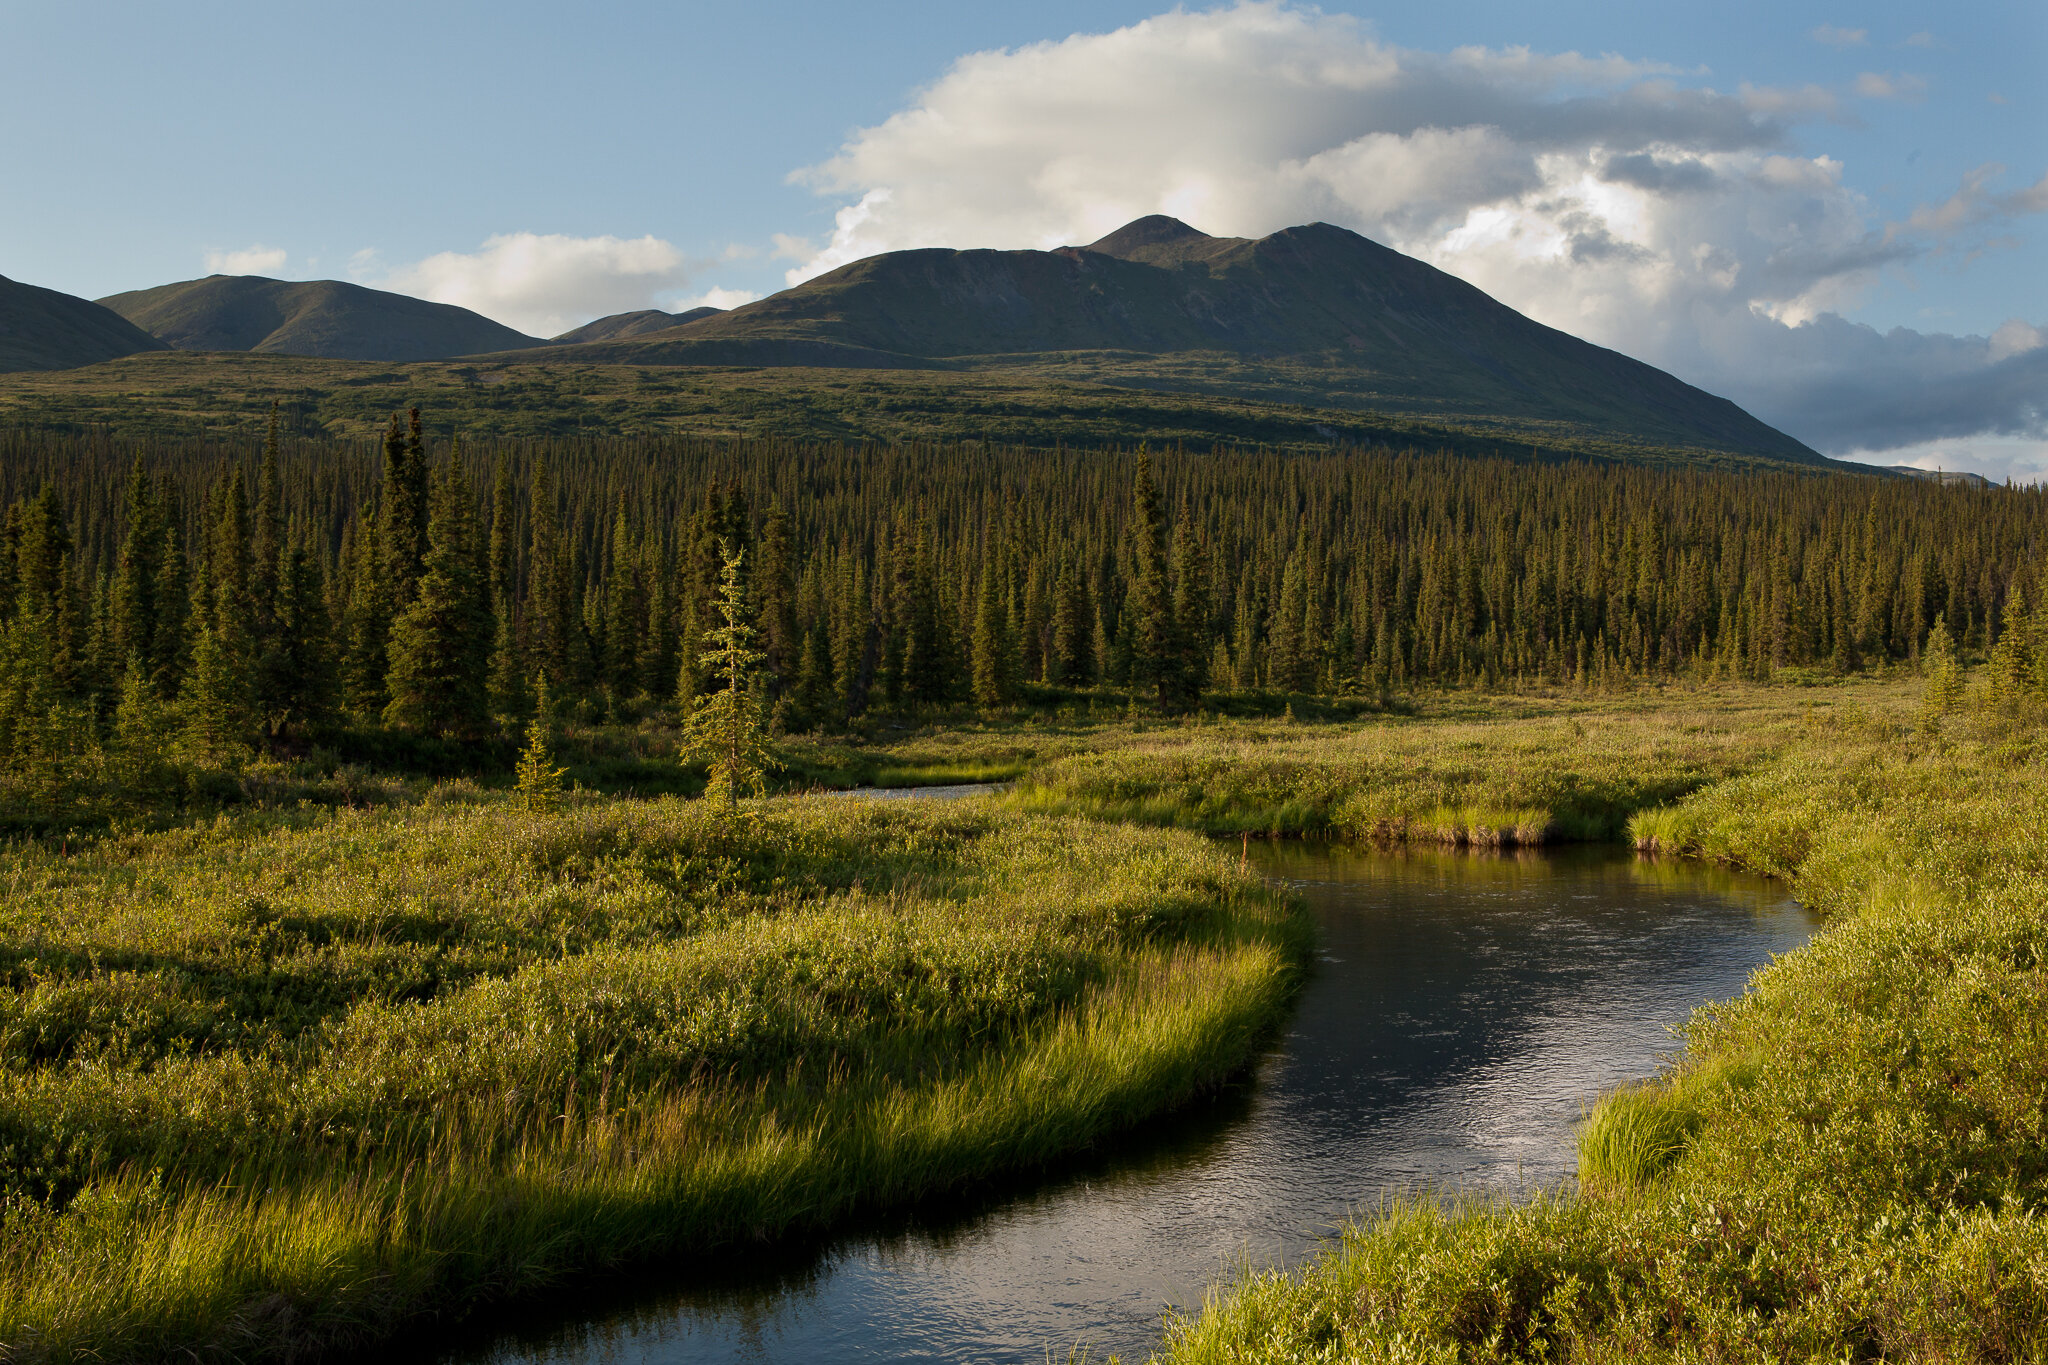 The creeks we guide on are made for dry fly fishing.  Uncrowded waters, this is Alaska at its best.